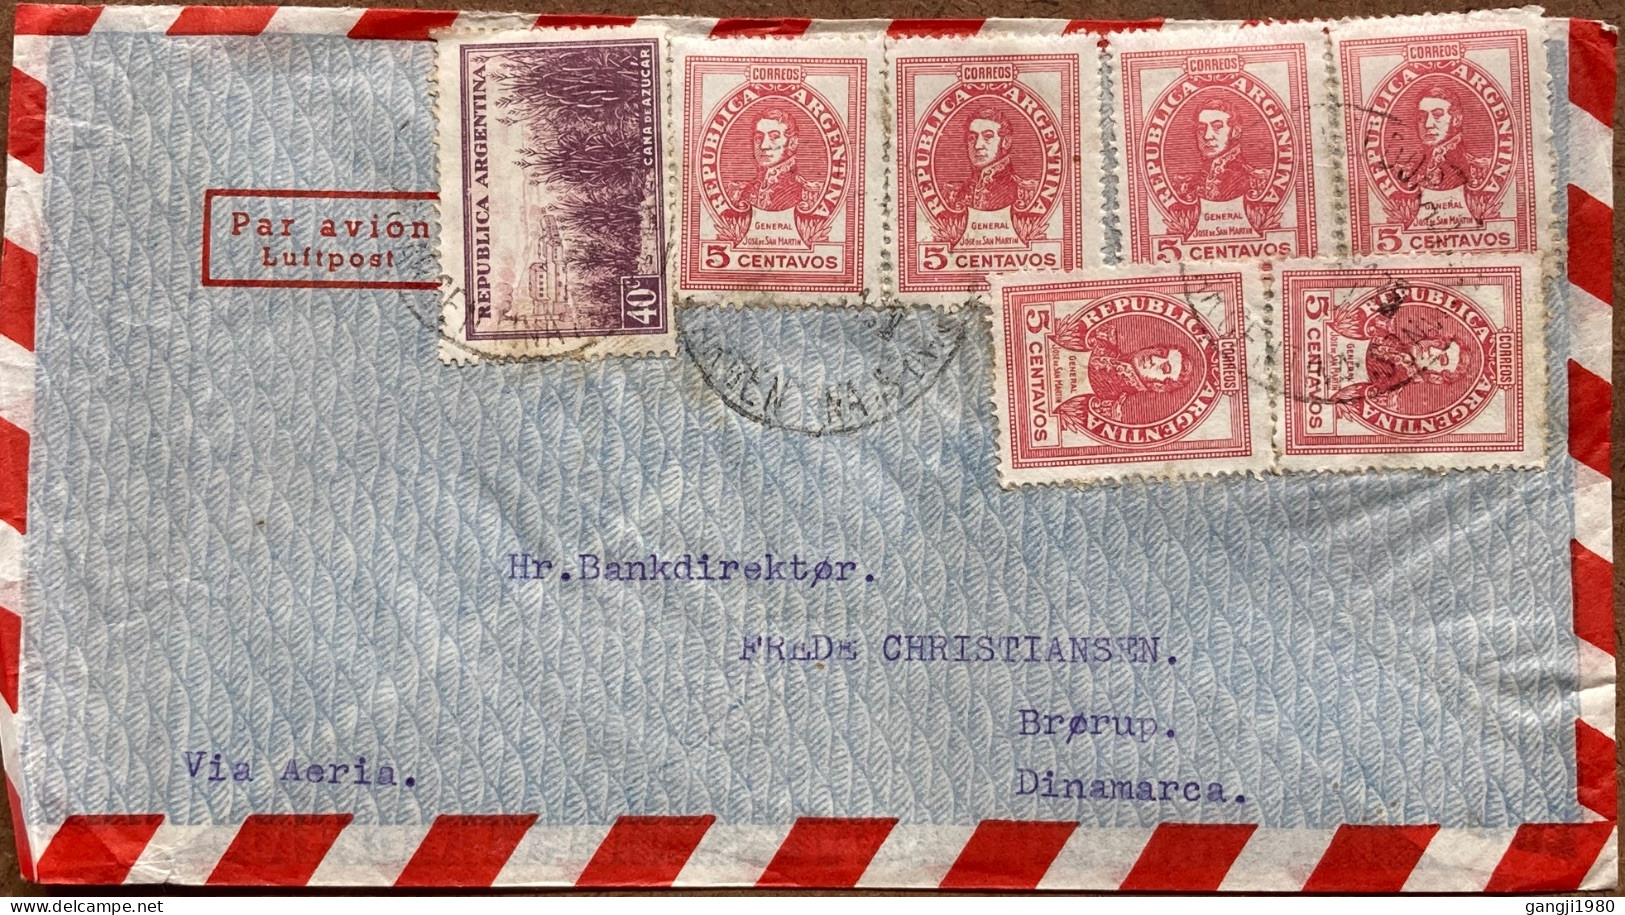 ARGENTINA 1950,COVER USED TO DENMARK SAN MARTIN INDUSTRY & AGRICULTRE MULTI 7 STAMP. - Covers & Documents